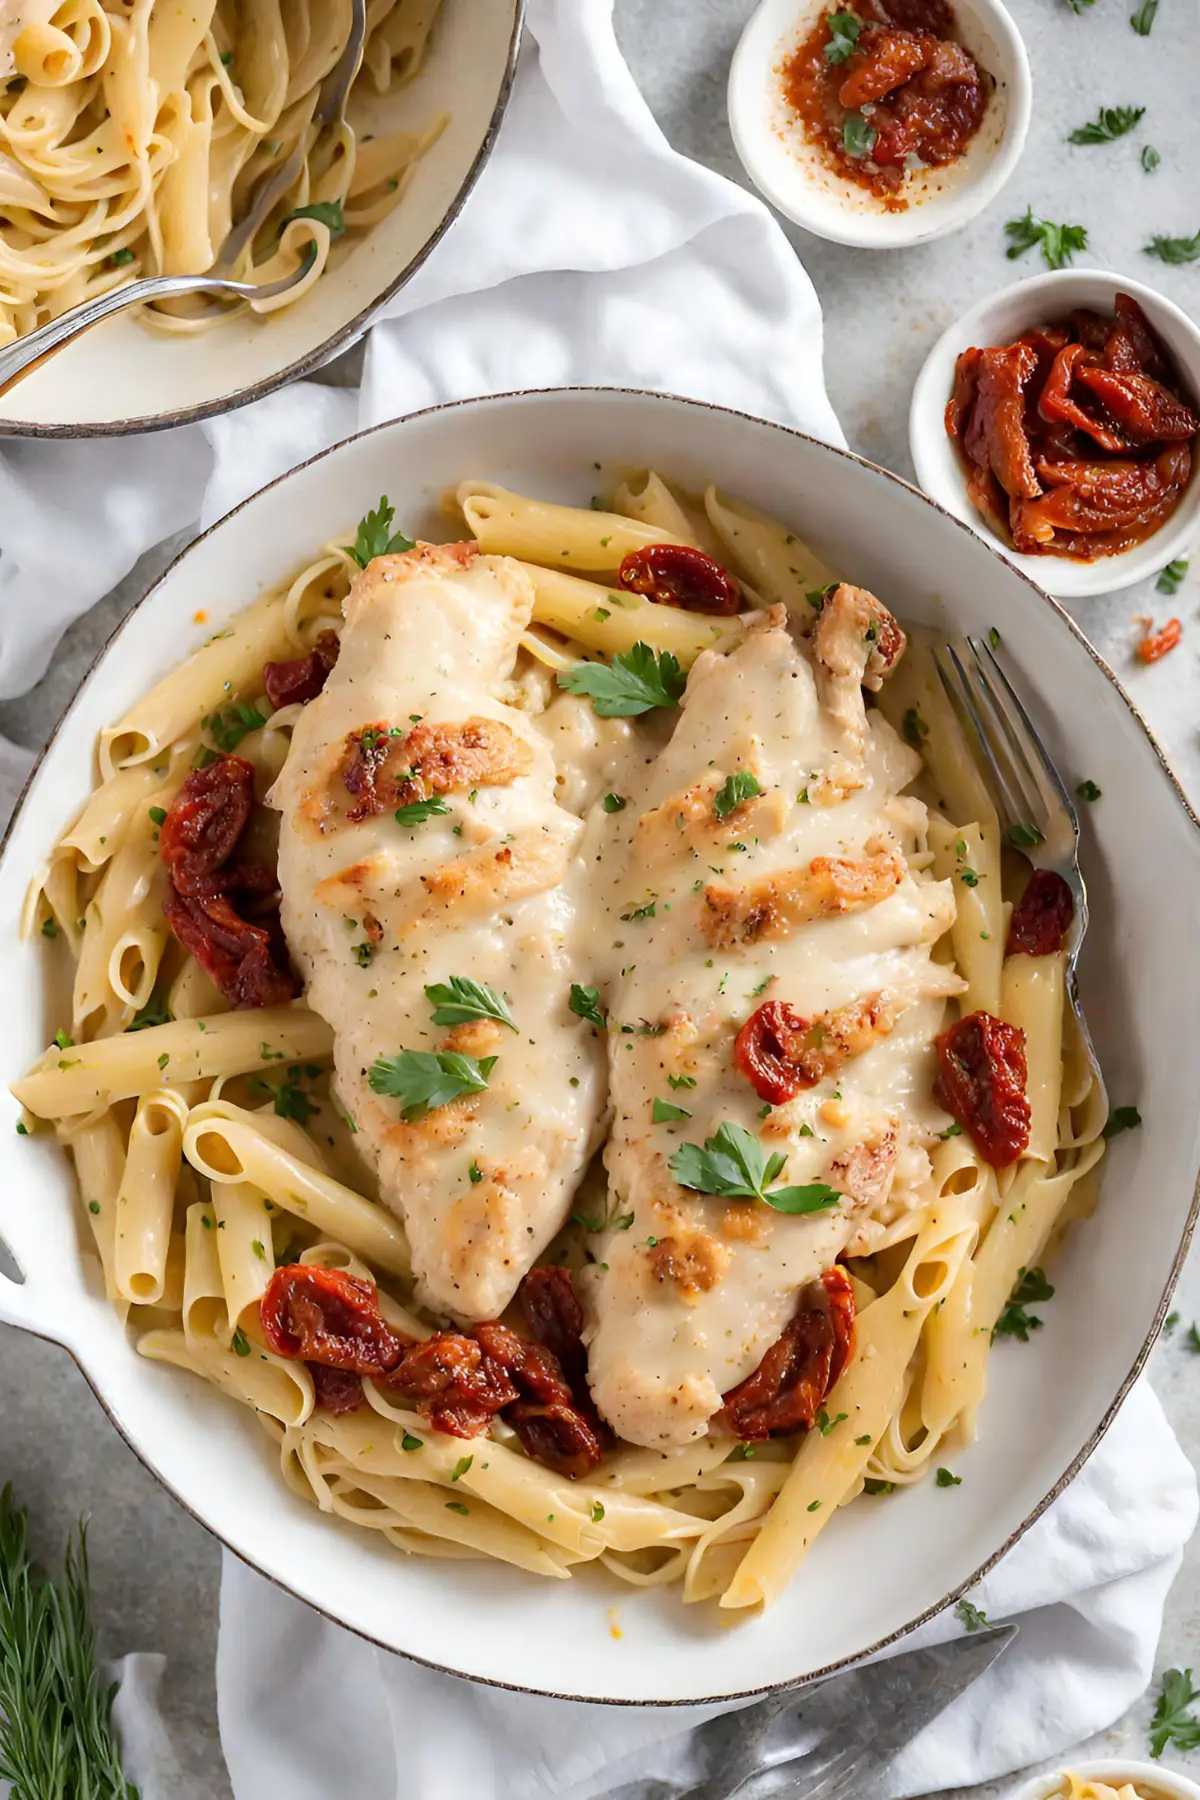 Marry Me Chicken with Pasta Ingredients, Substitutions, and Step-by-Step Instructions